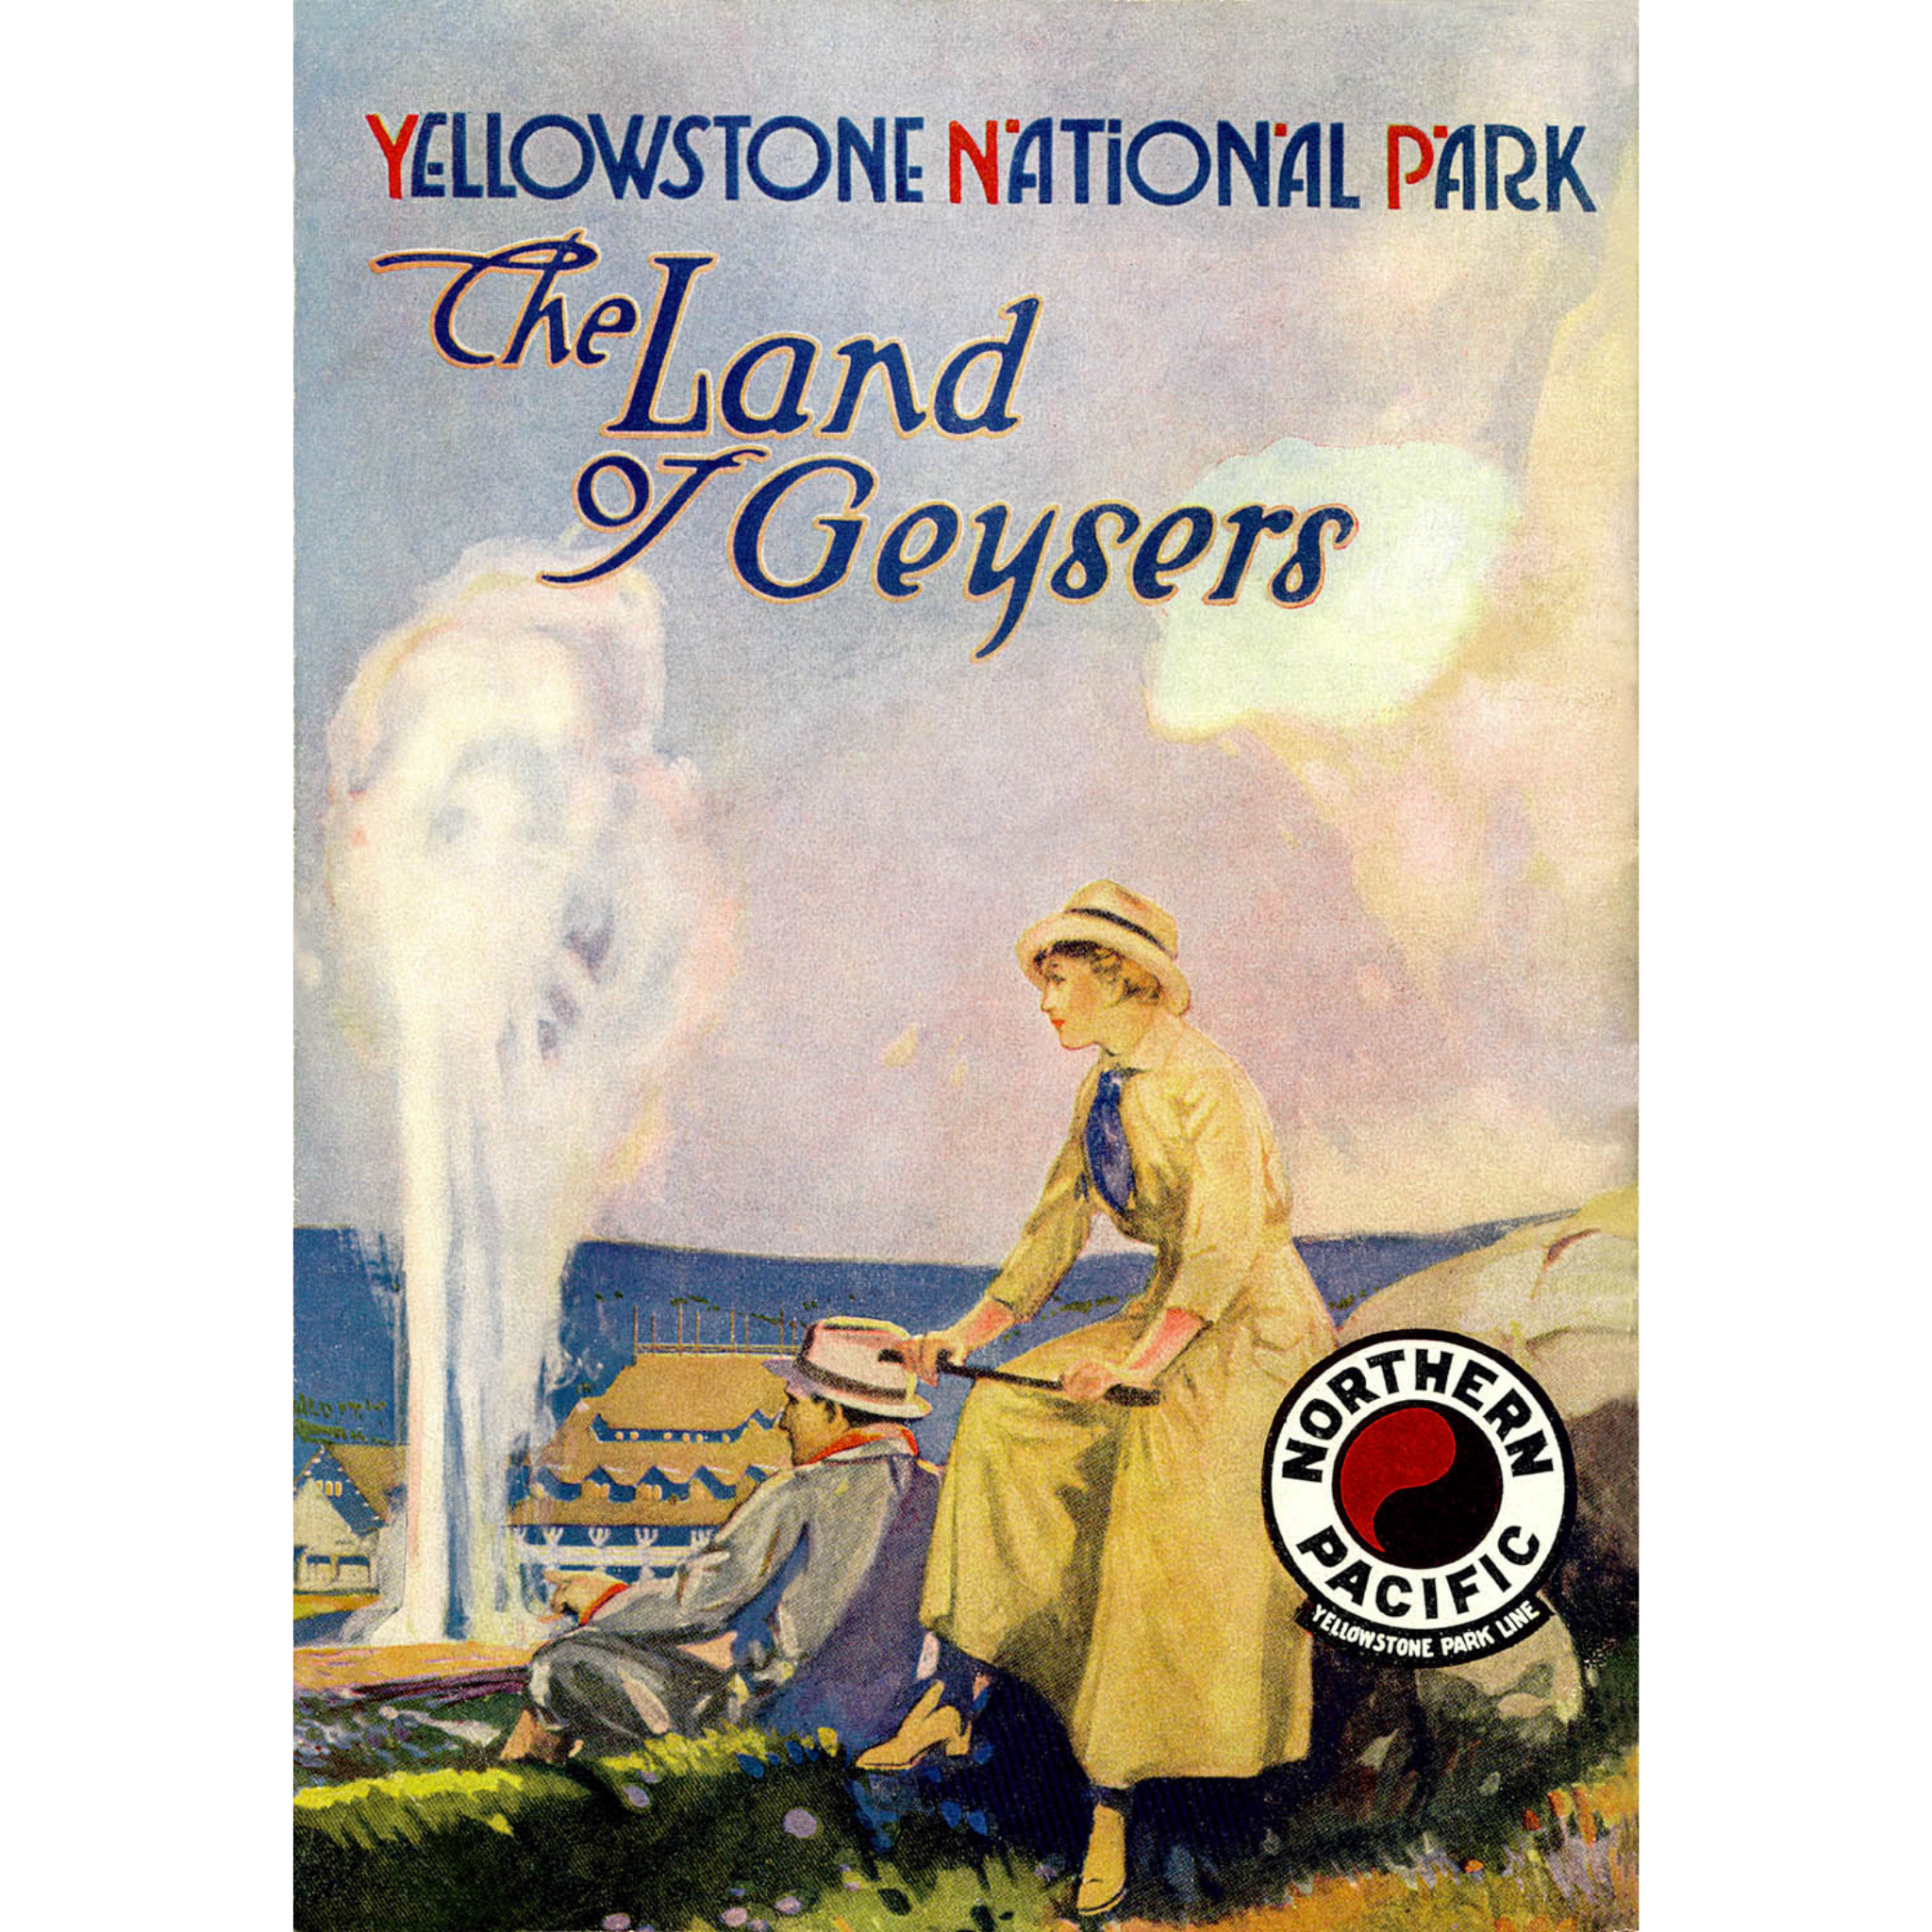 Yellowstone National Park: The Land of Geysers (NPRR) - ca. 1916 Lithograph